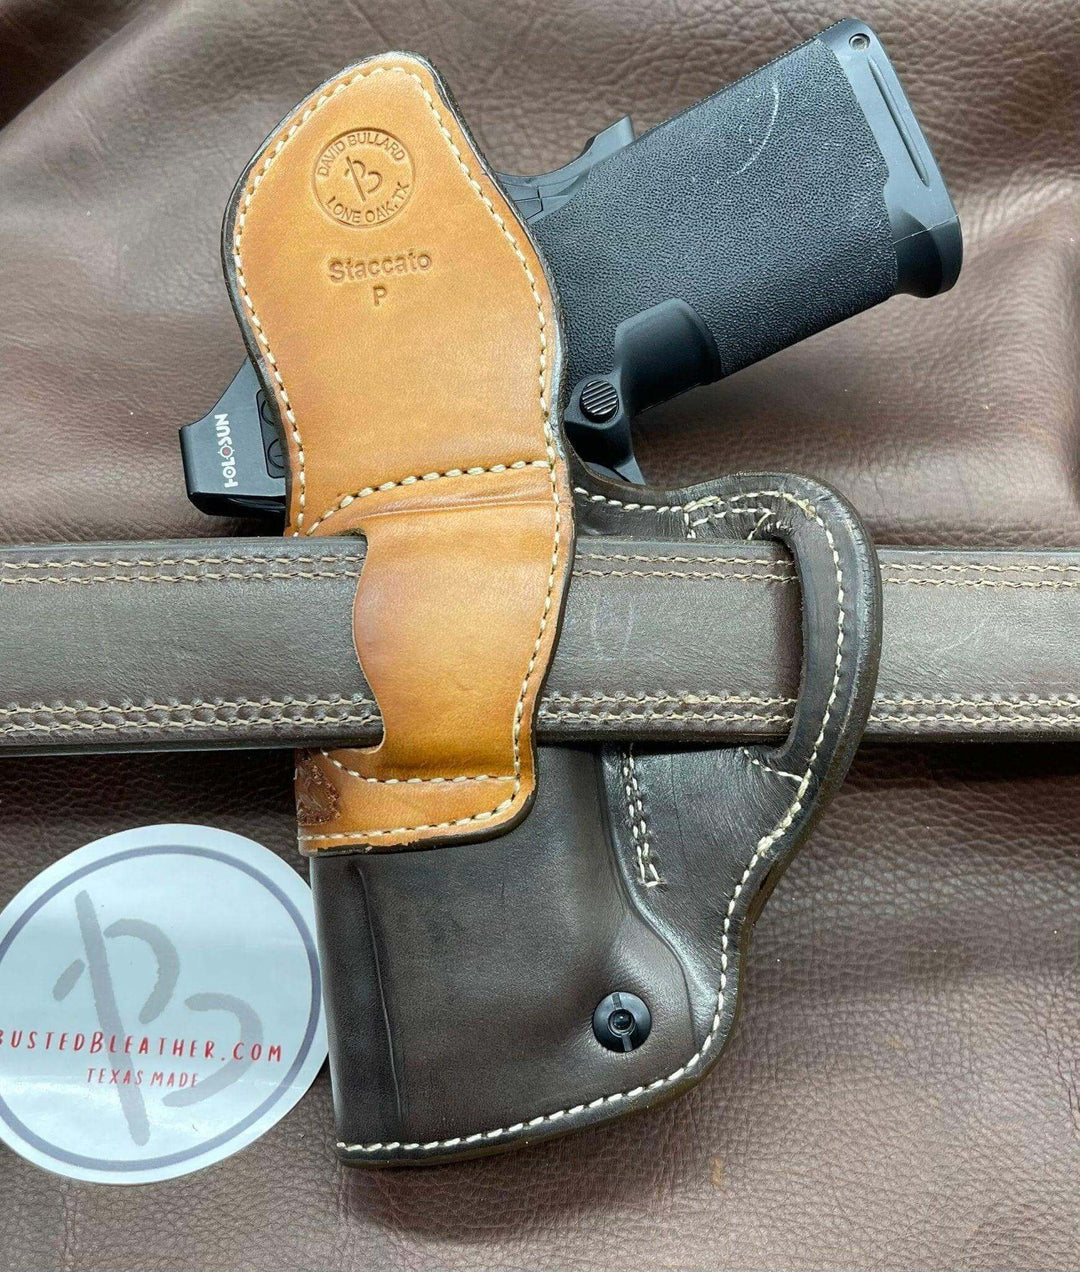 *Made to Order* LH/RH Raptor Holster Made for Your Gun w/Saddle Oil Basket Weave Reinforcement Trim & Texas Star Concho-Busted B Leather